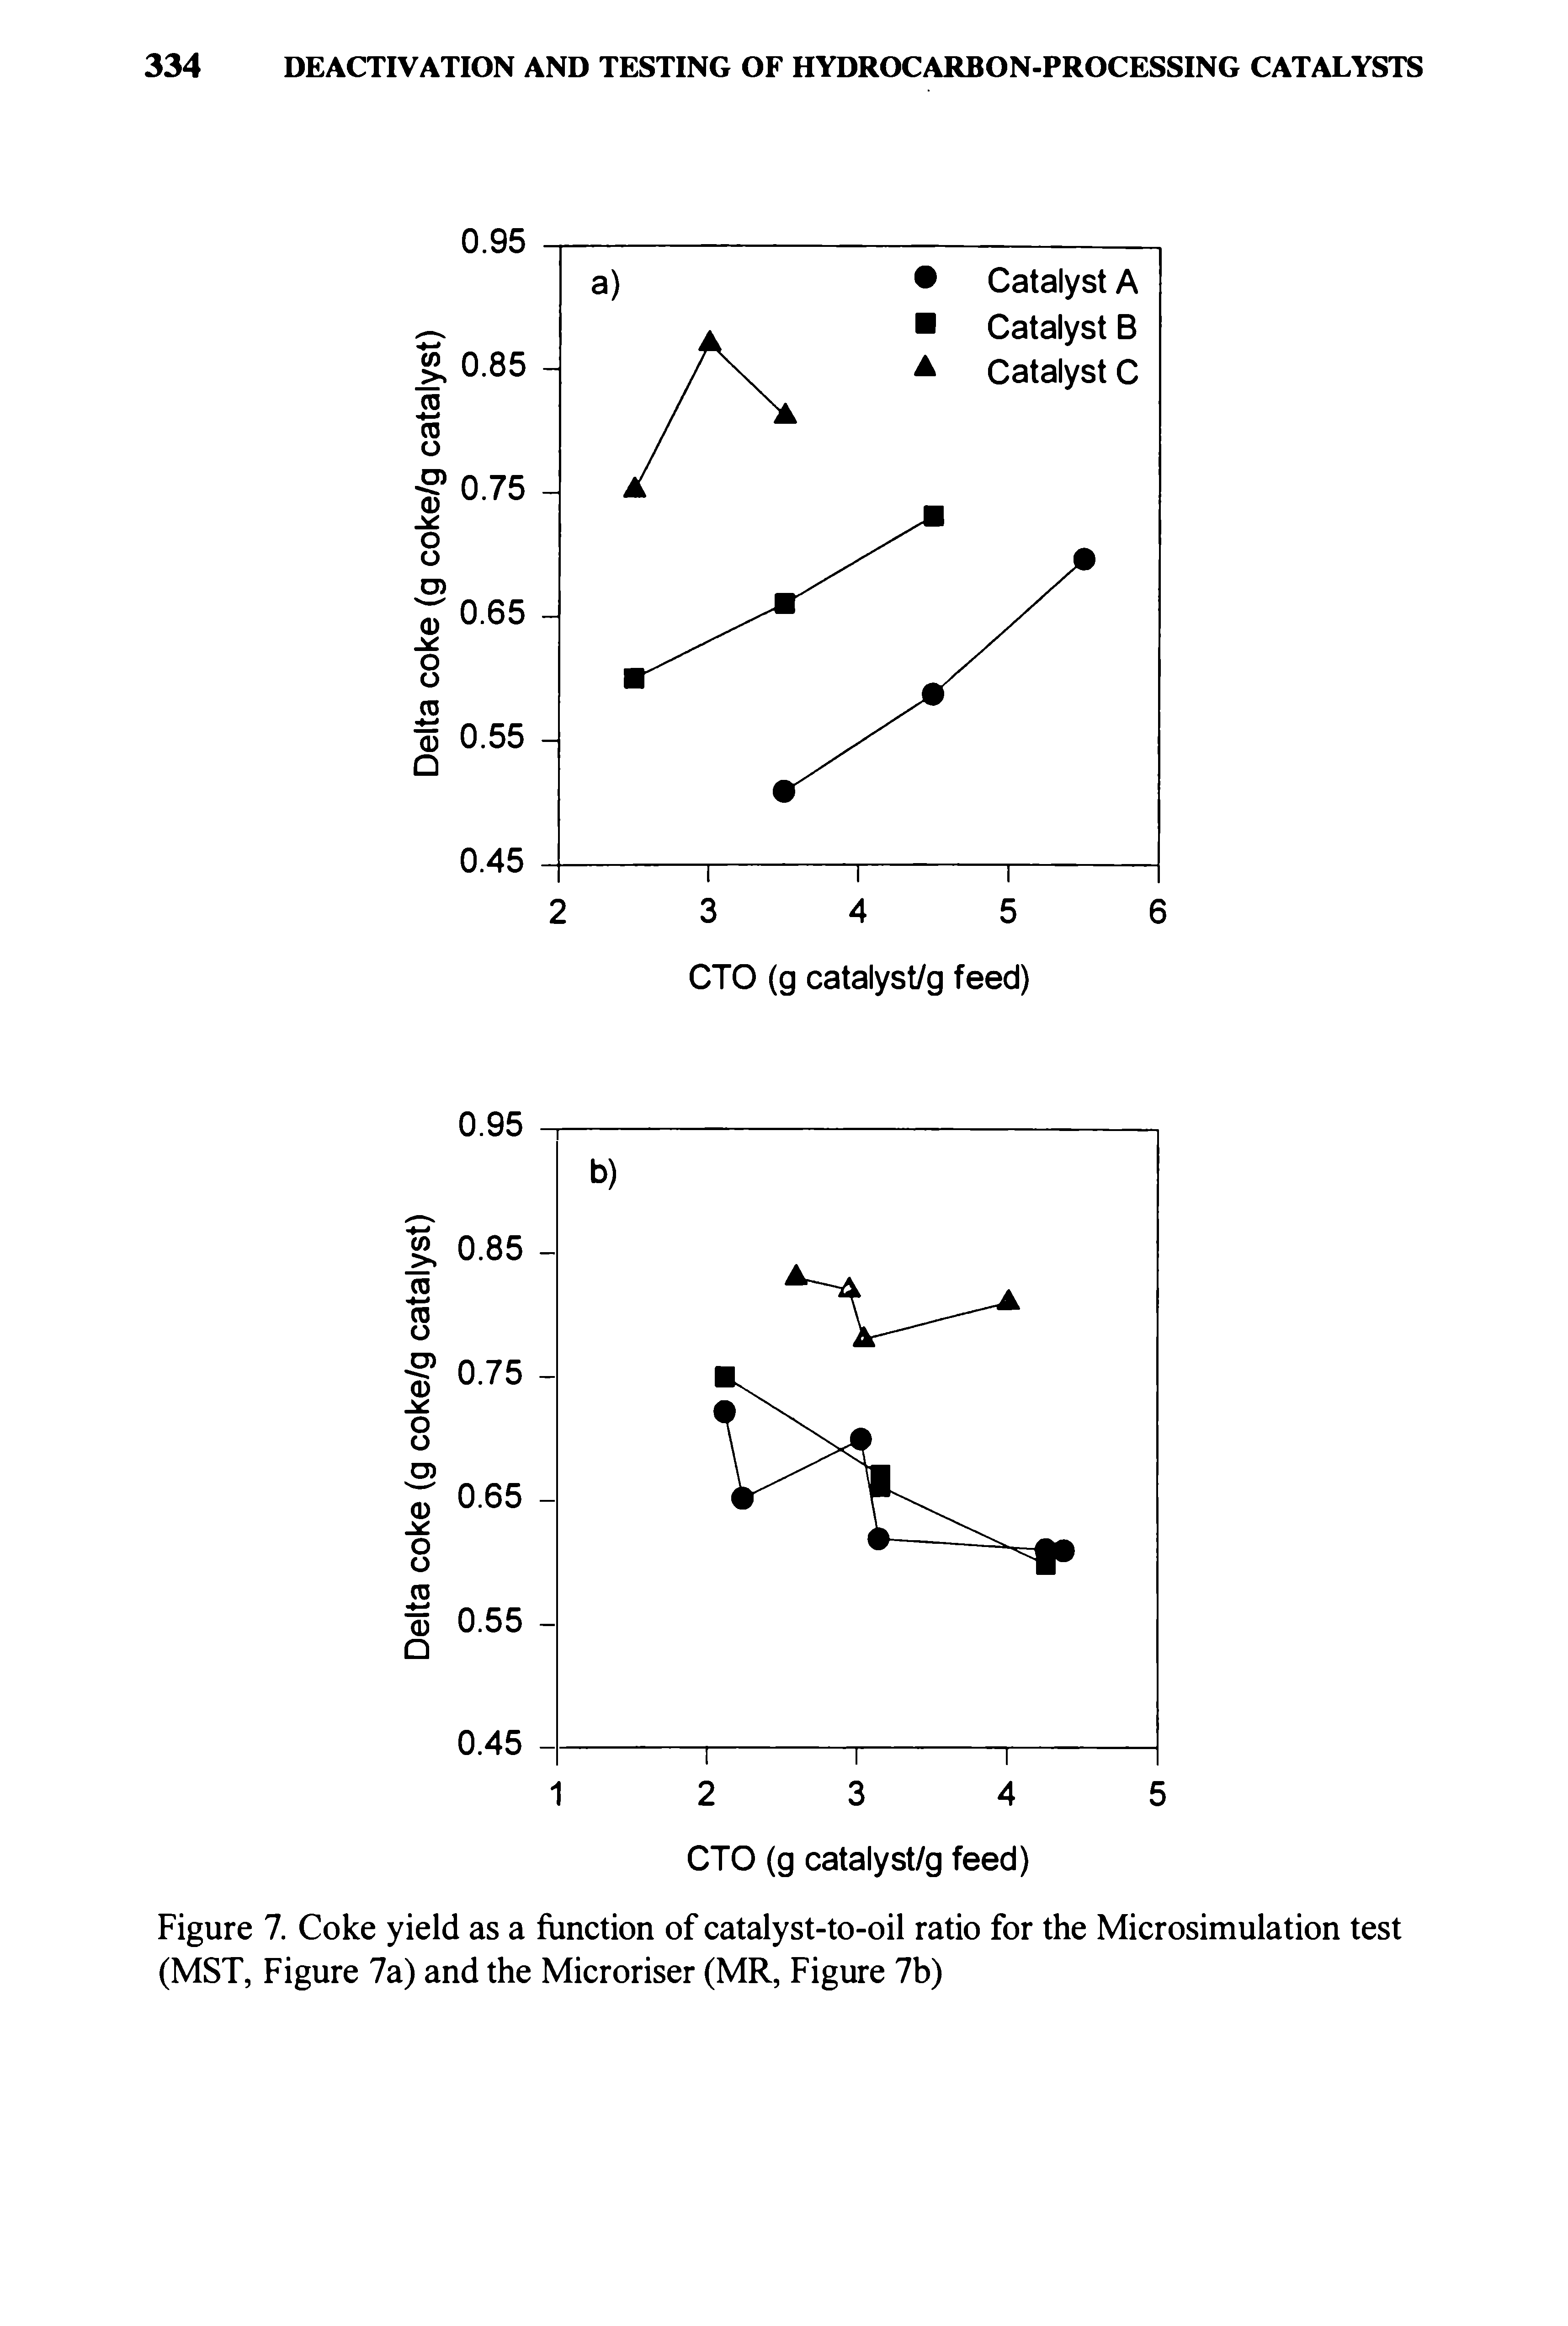 Figure 7. Coke yield as a function of catalyst-to-oil ratio for the Microsimulation test (MST, Figure 7a) and the Microriser (MR, Figure 7b)...